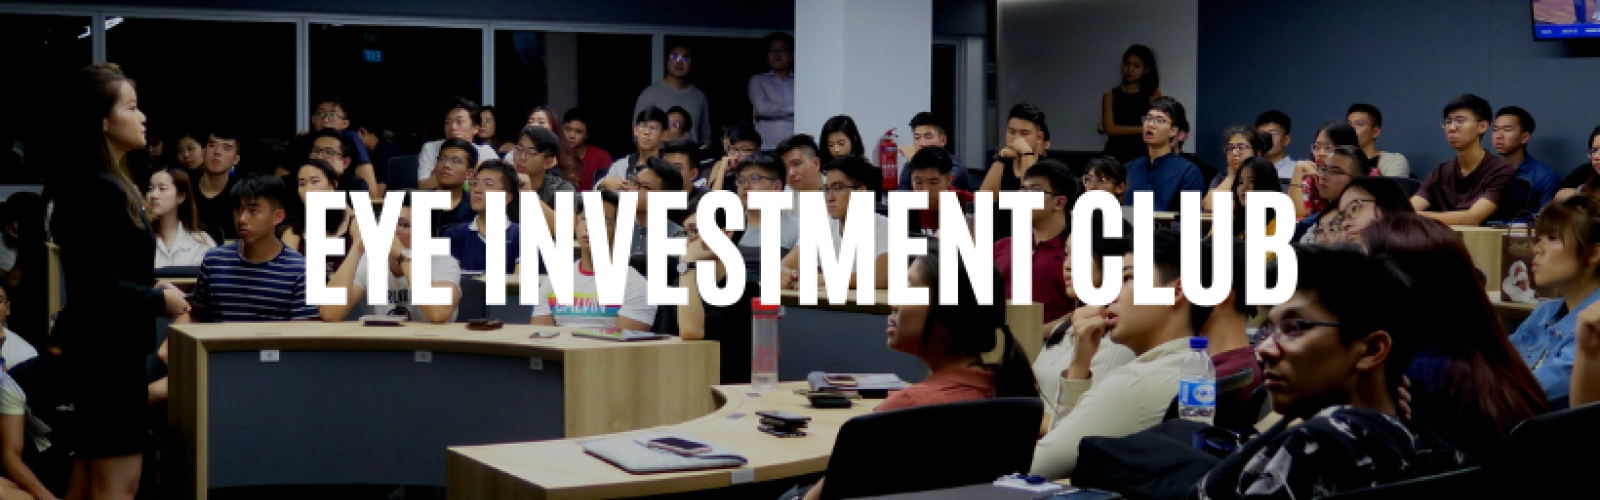 SMU EYE Investment Cover